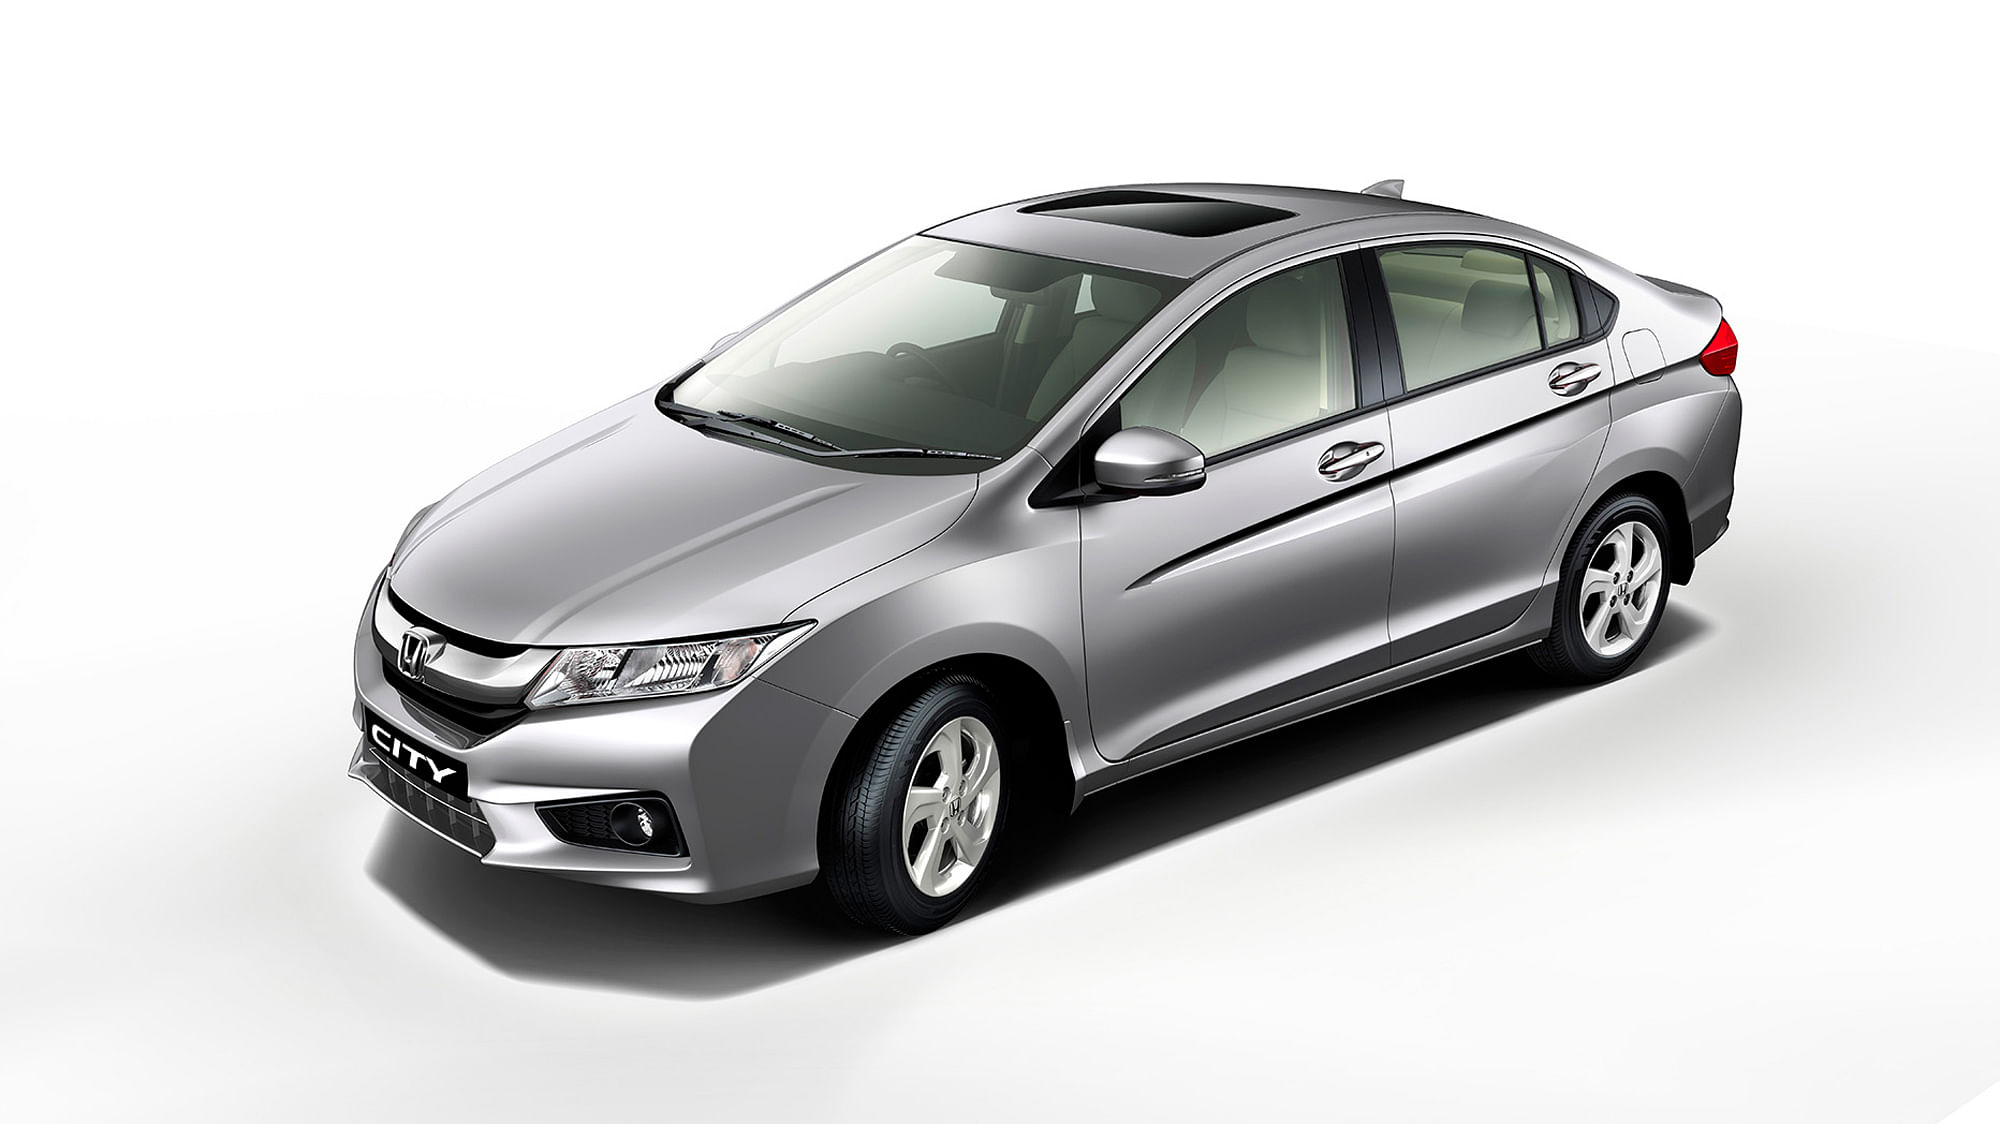 64,428 units of Honda City were recalled this week due to safety issues. (Photo Courtesy: Honda India)